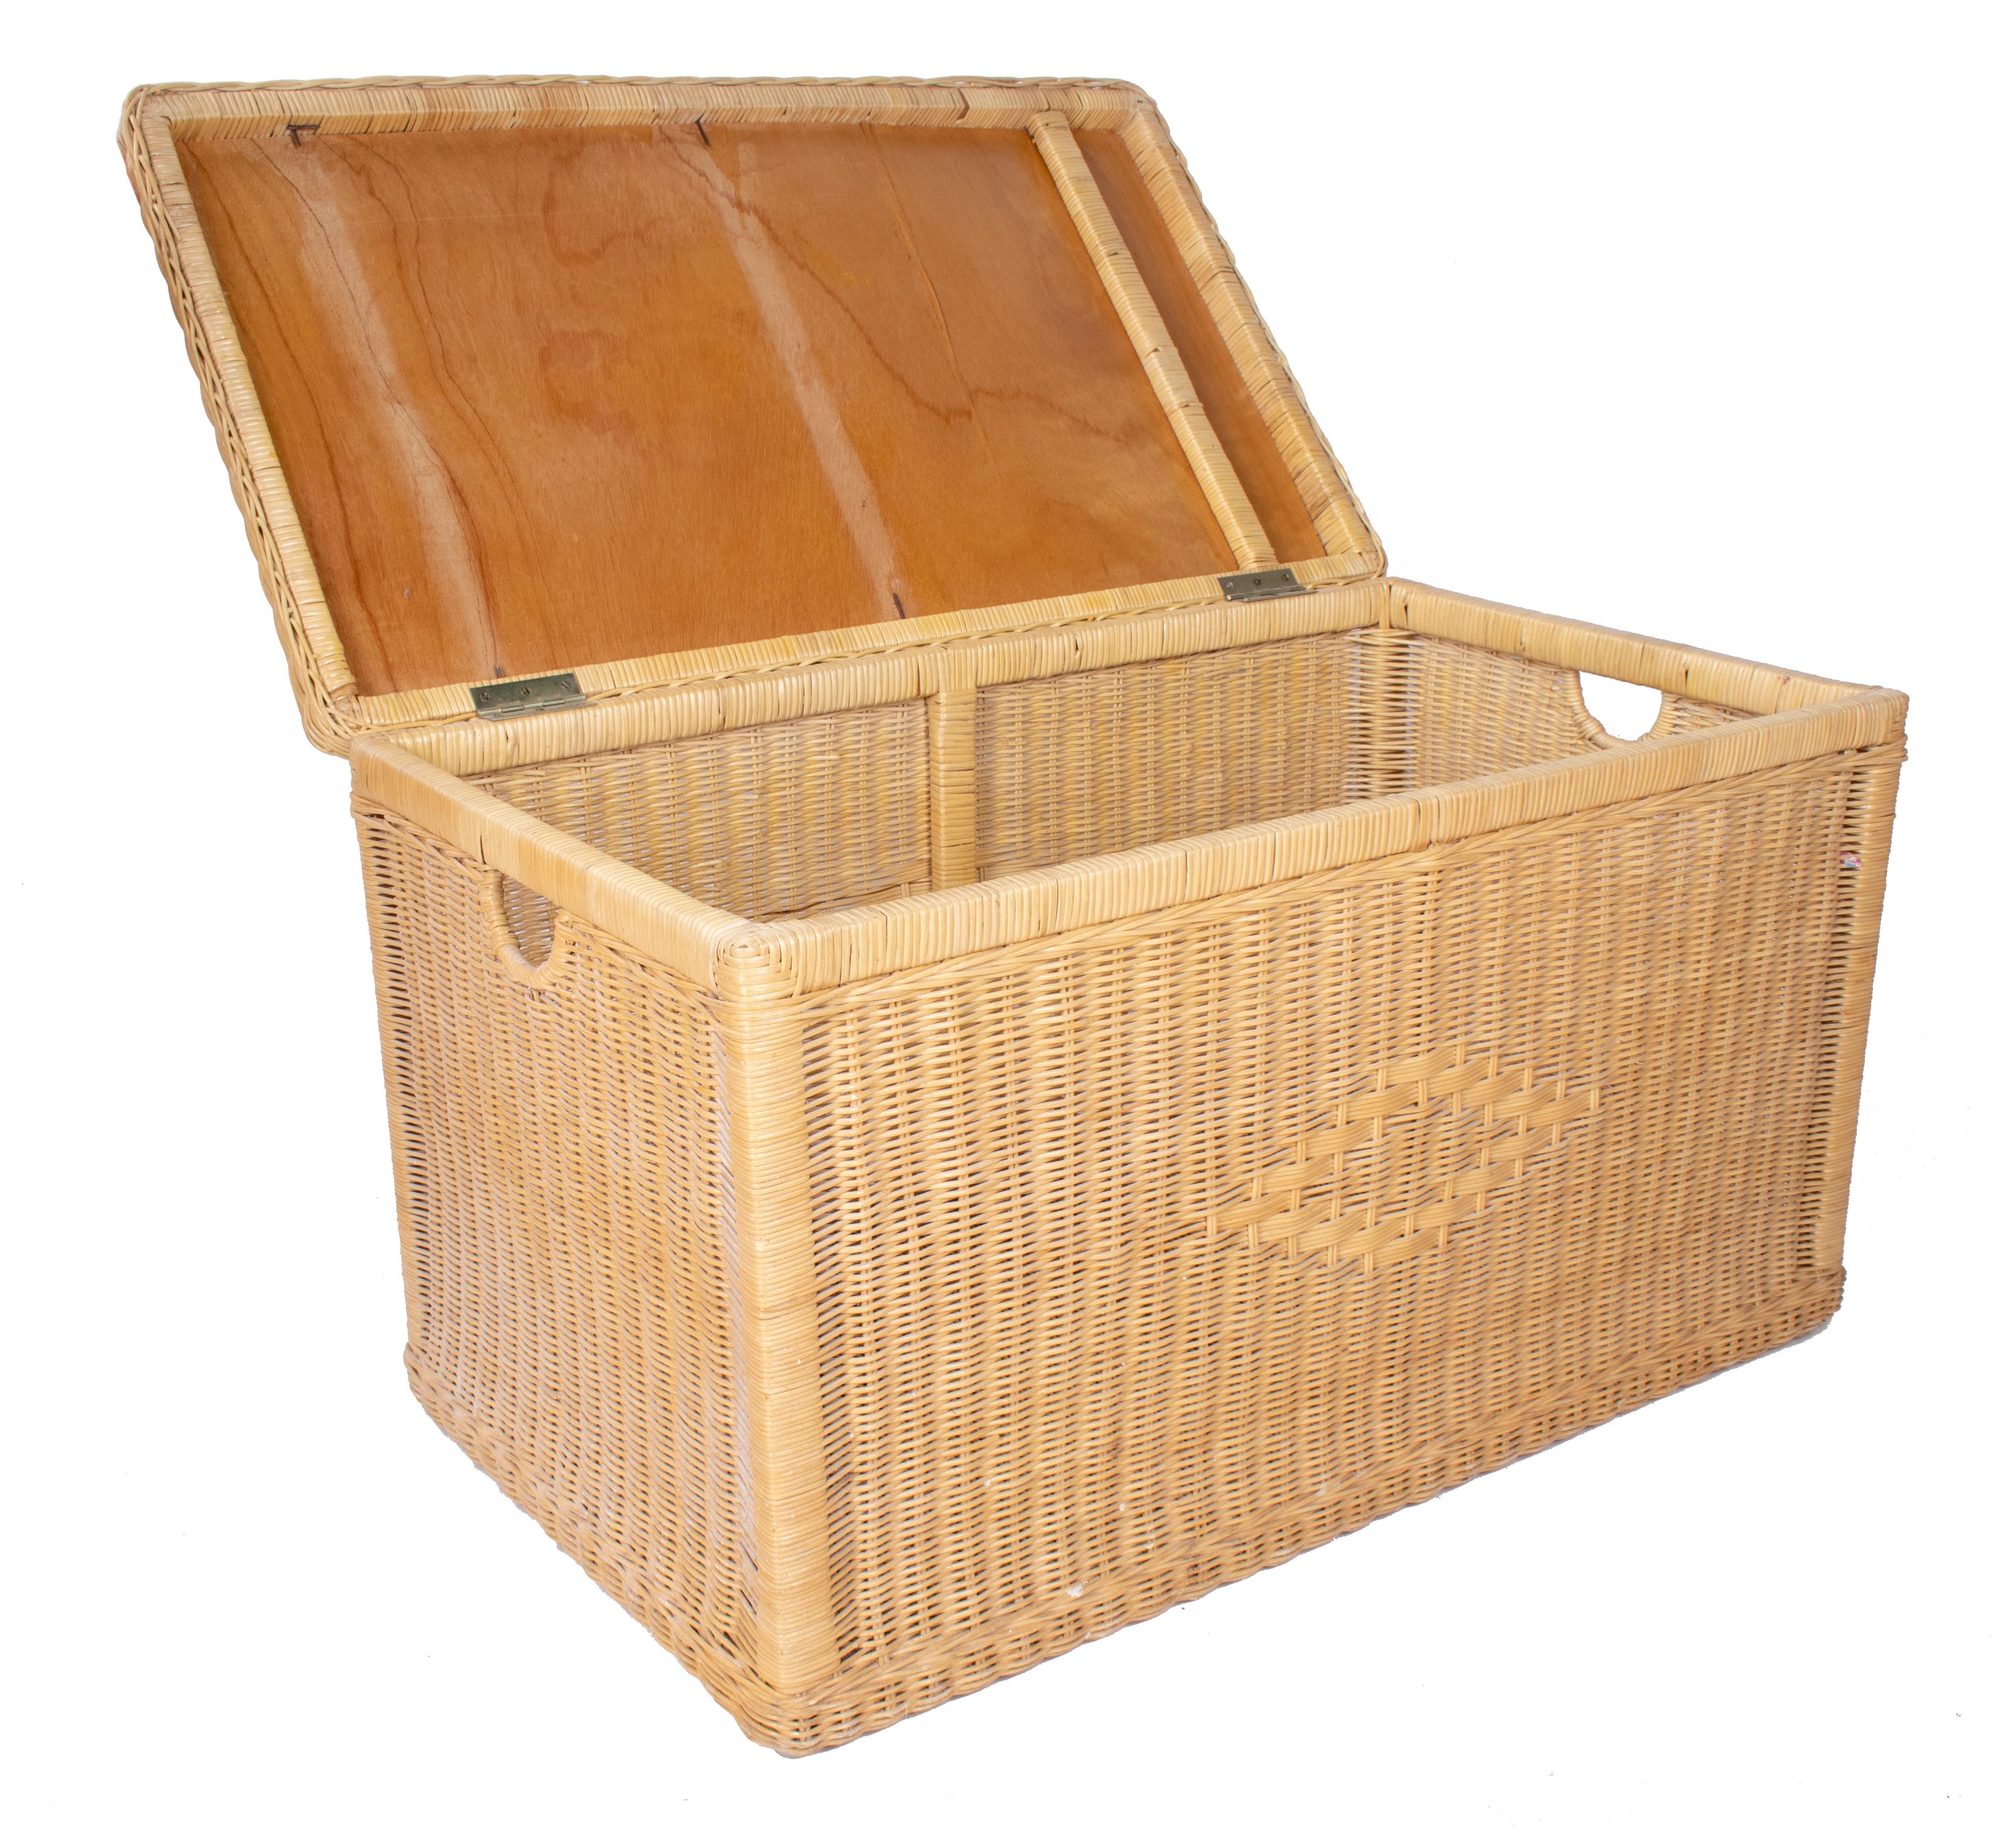 Vintage wicker trunk with wooden frame and lid.